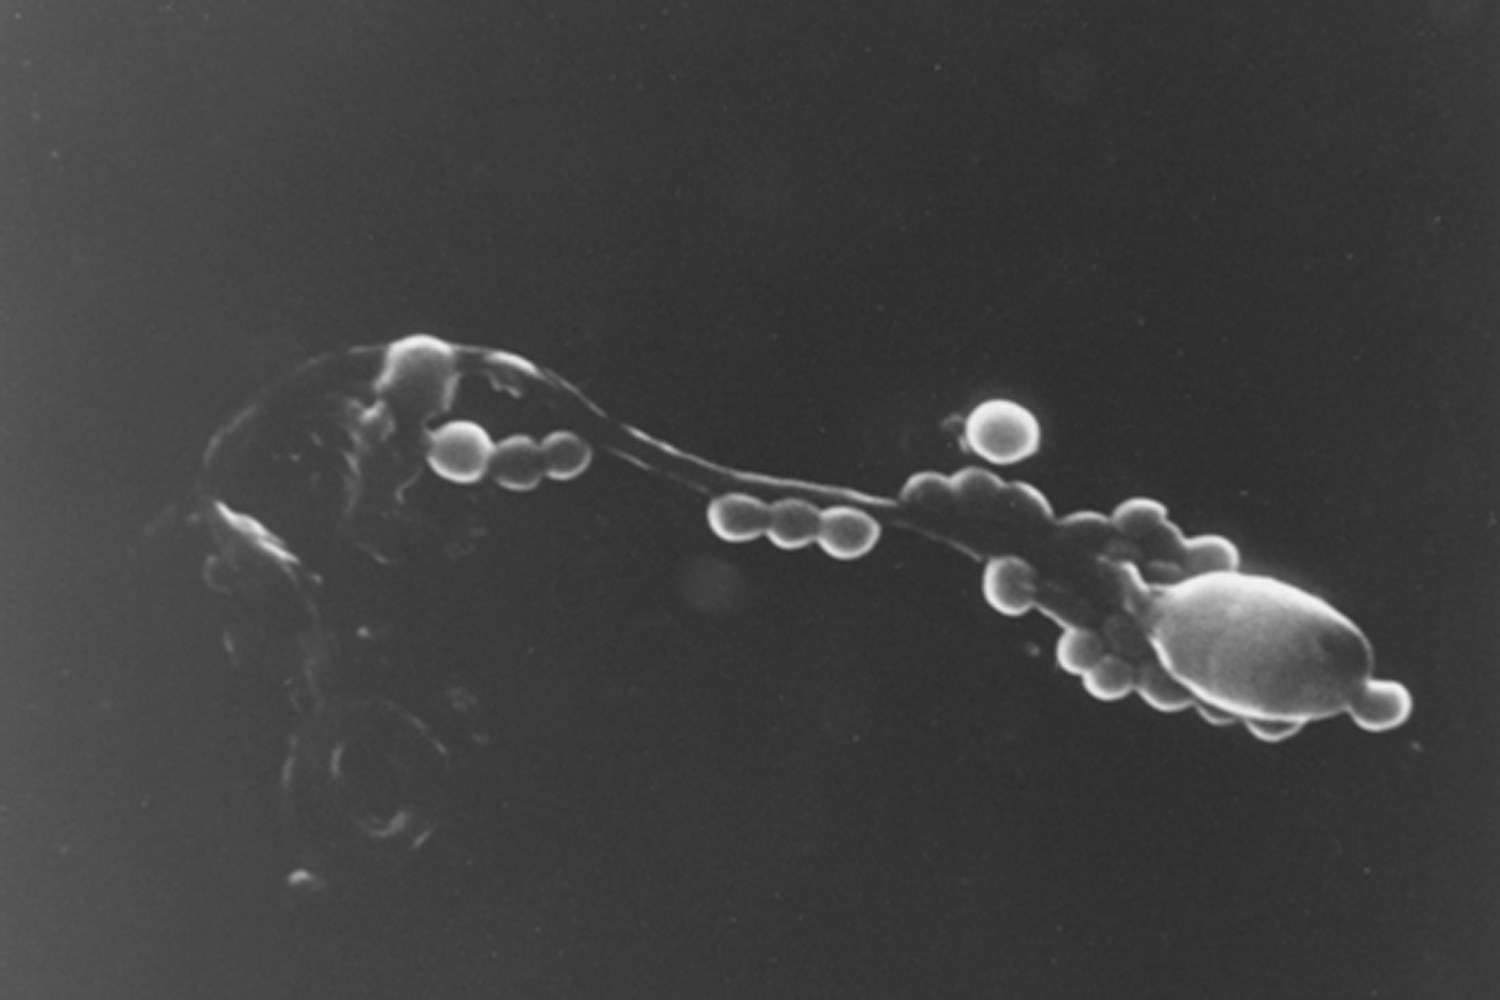 Scanning Electron Micrograph showing Adherence of Staphylococcus Aureus to Human Sperm